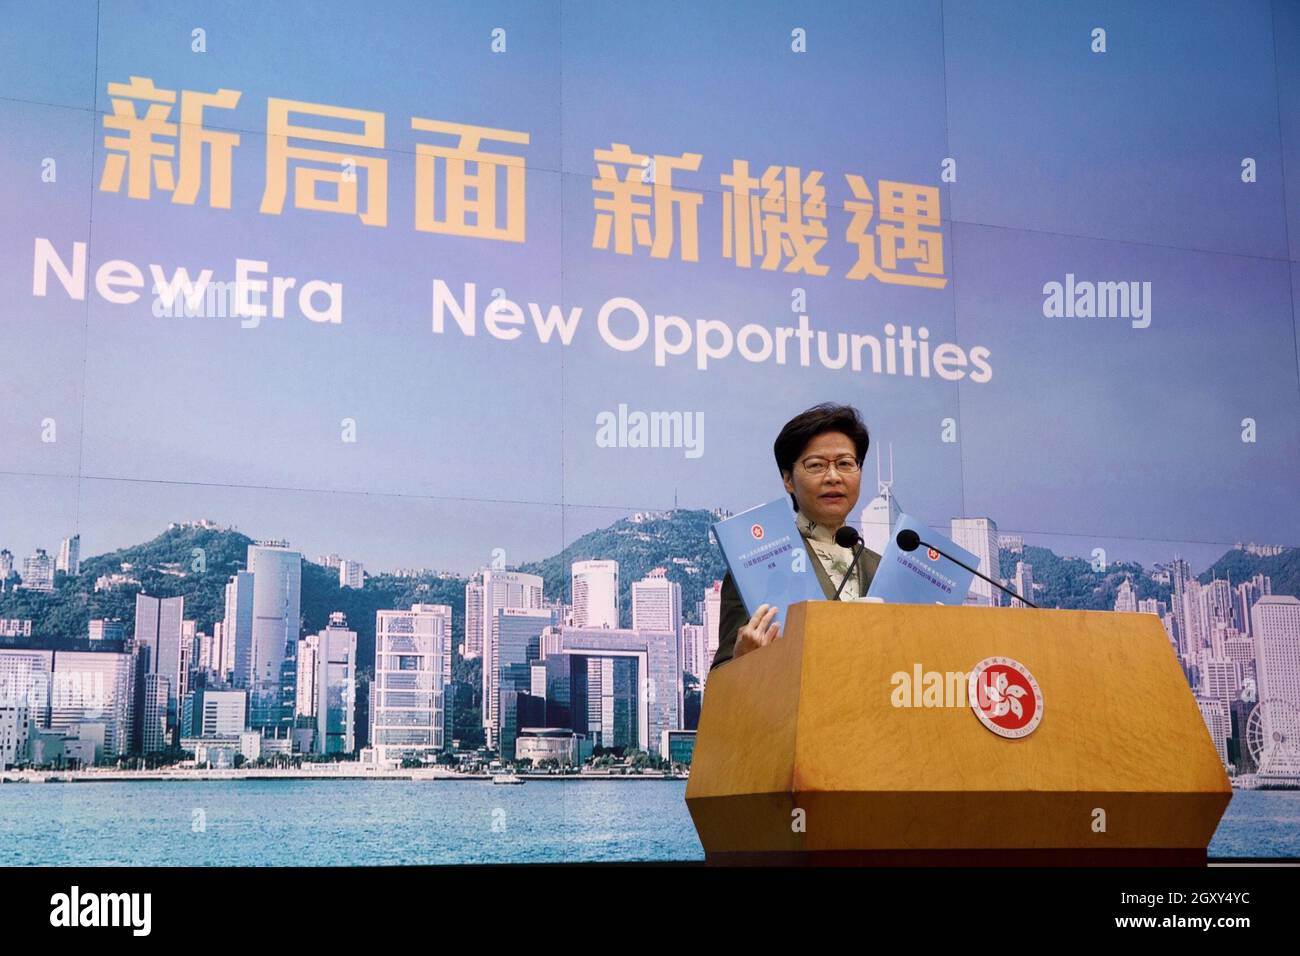 (211006) -- HONG KONG, Oct. 6, 2021 (Xinhua) -- Chief Executive of China's Hong Kong Special Administrative Region (HKSAR) Carrie Lam speaks during a press conference in Hong Kong, south China, Oct. 5, 2021. Carrie Lam unveiled Wednesday an array of new measures to reinforce Hong Kong's status as a global financial hub, including improving the listing regime of the stock market and facilitating the cross-boundary flow of renminbi. The 2021 policy address, the fifth of its kind since Lam took office in 2017, focuses on bolstering Hong Kong's economy, tackling an entrenched housing shortage a Stock Photo